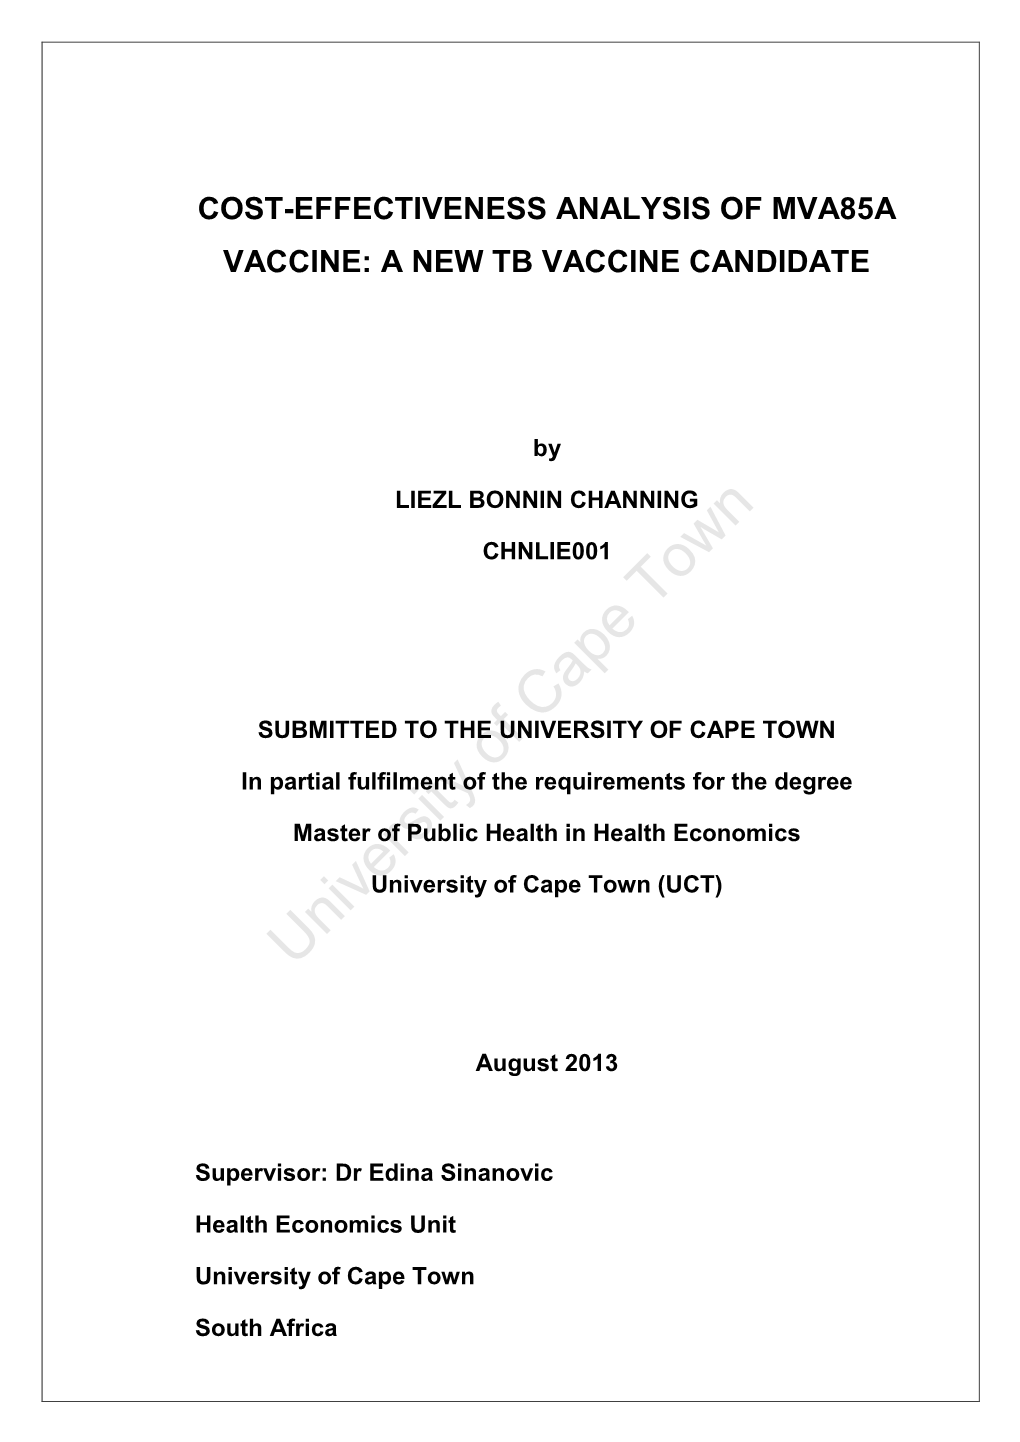 Cost-Effectiveness Analysis of Mva85a Vaccine: a New Tb Vaccine Candidate